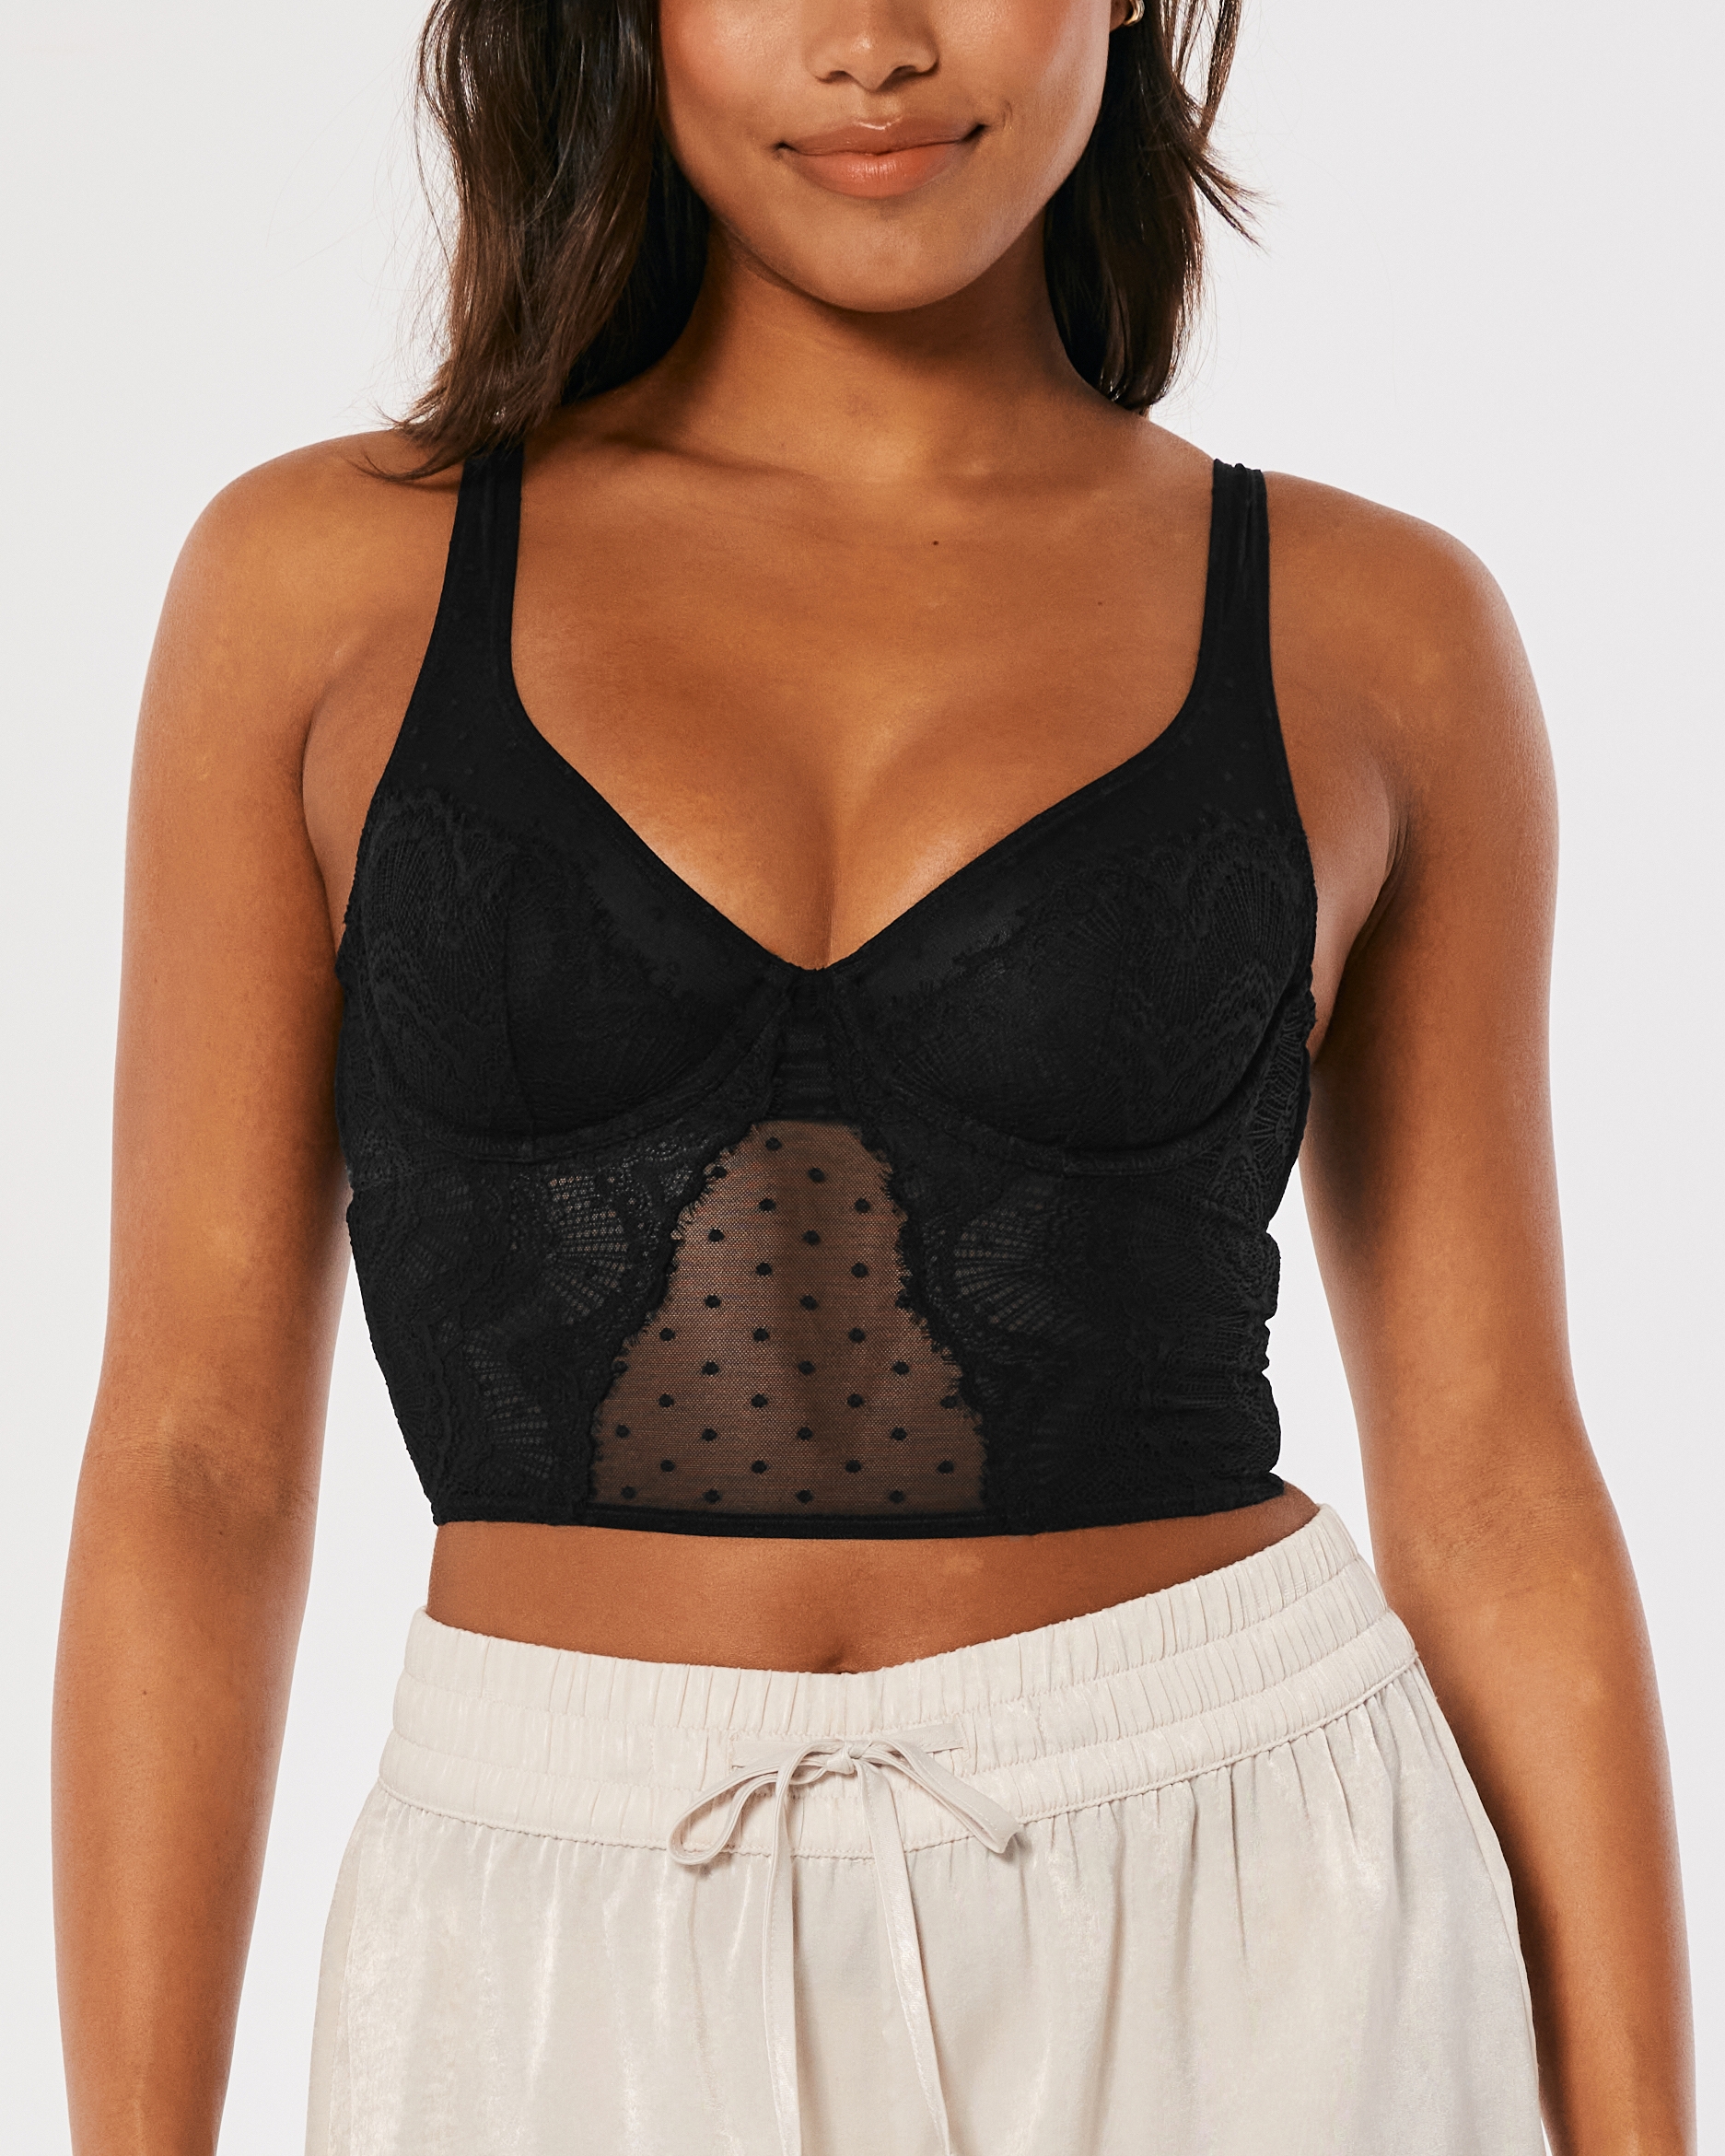 Hollister Gilly Hicks Lace & Dot Mesh Bustier Bra Top